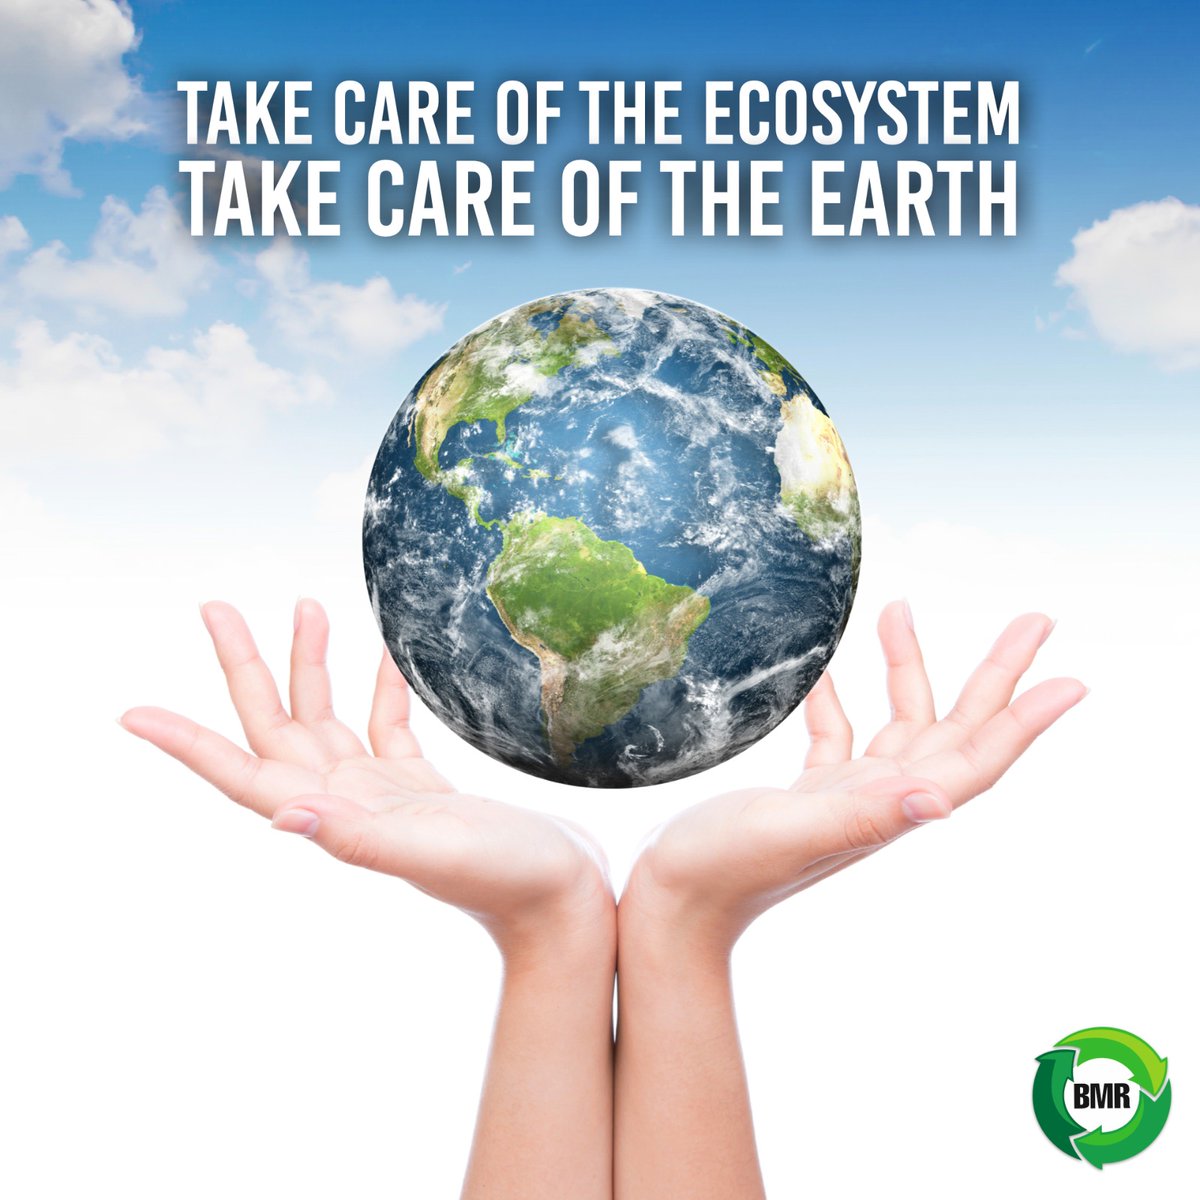 If we take care of our home, it will take care of us. 

#metalrecycling #earth #recyclingindustries #savefuture #BMR #event #recycling